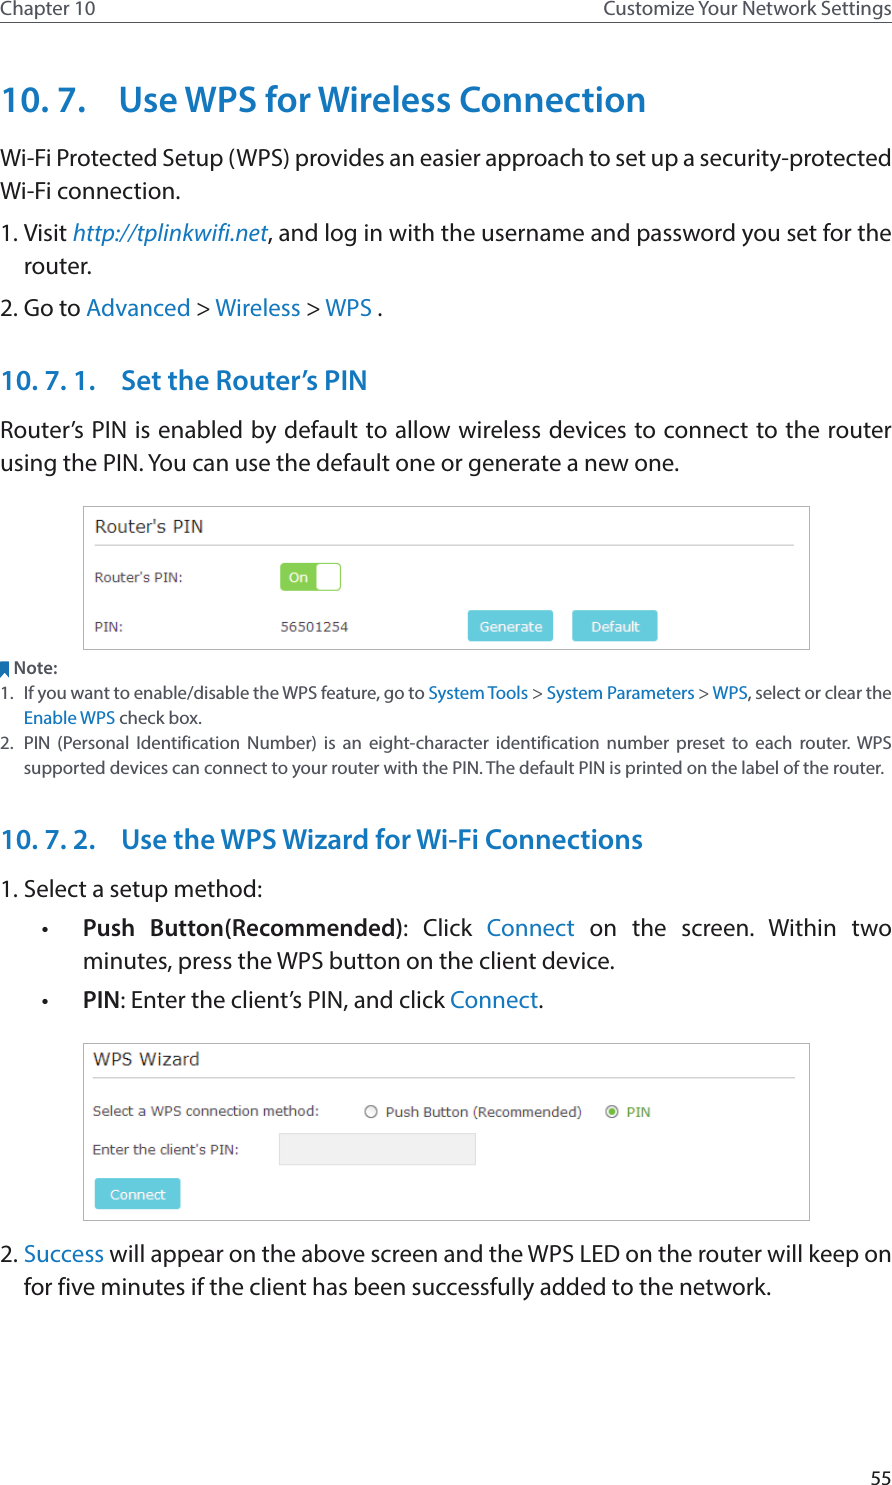 55Chapter 10 Customize Your Network Settings10. 7.  Use WPS for Wireless ConnectionWi-Fi Protected Setup (WPS) provides an easier approach to set up a security-protected Wi-Fi connection.1. Visit http://tplinkwifi.net, and log in with the username and password you set for the router.2. Go to Advanced &gt; Wireless &gt; WPS .10. 7. 1.  Set the Router’s PINRouter’s PIN is enabled by default to allow wireless devices to connect to the router using the PIN. You can use the default one or generate a new one.Note:1.  If you want to enable/disable the WPS feature, go to System Tools &gt; System Parameters &gt; WPS, select or clear the Enable WPS check box.2.  PIN (Personal Identification Number) is an eight-character identification number preset to each router. WPS supported devices can connect to your router with the PIN. The default PIN is printed on the label of the router.10. 7. 2.  Use the WPS Wizard for Wi-Fi Connections1. Select a setup method: •  Push Button(Recommended): Click Connect on the screen. Within two minutes, press the WPS button on the client device.•  PIN: Enter the client’s PIN, and click Connect.2. Success will appear on the above screen and the WPS LED on the router will keep on for five minutes if the client has been successfully added to the network.